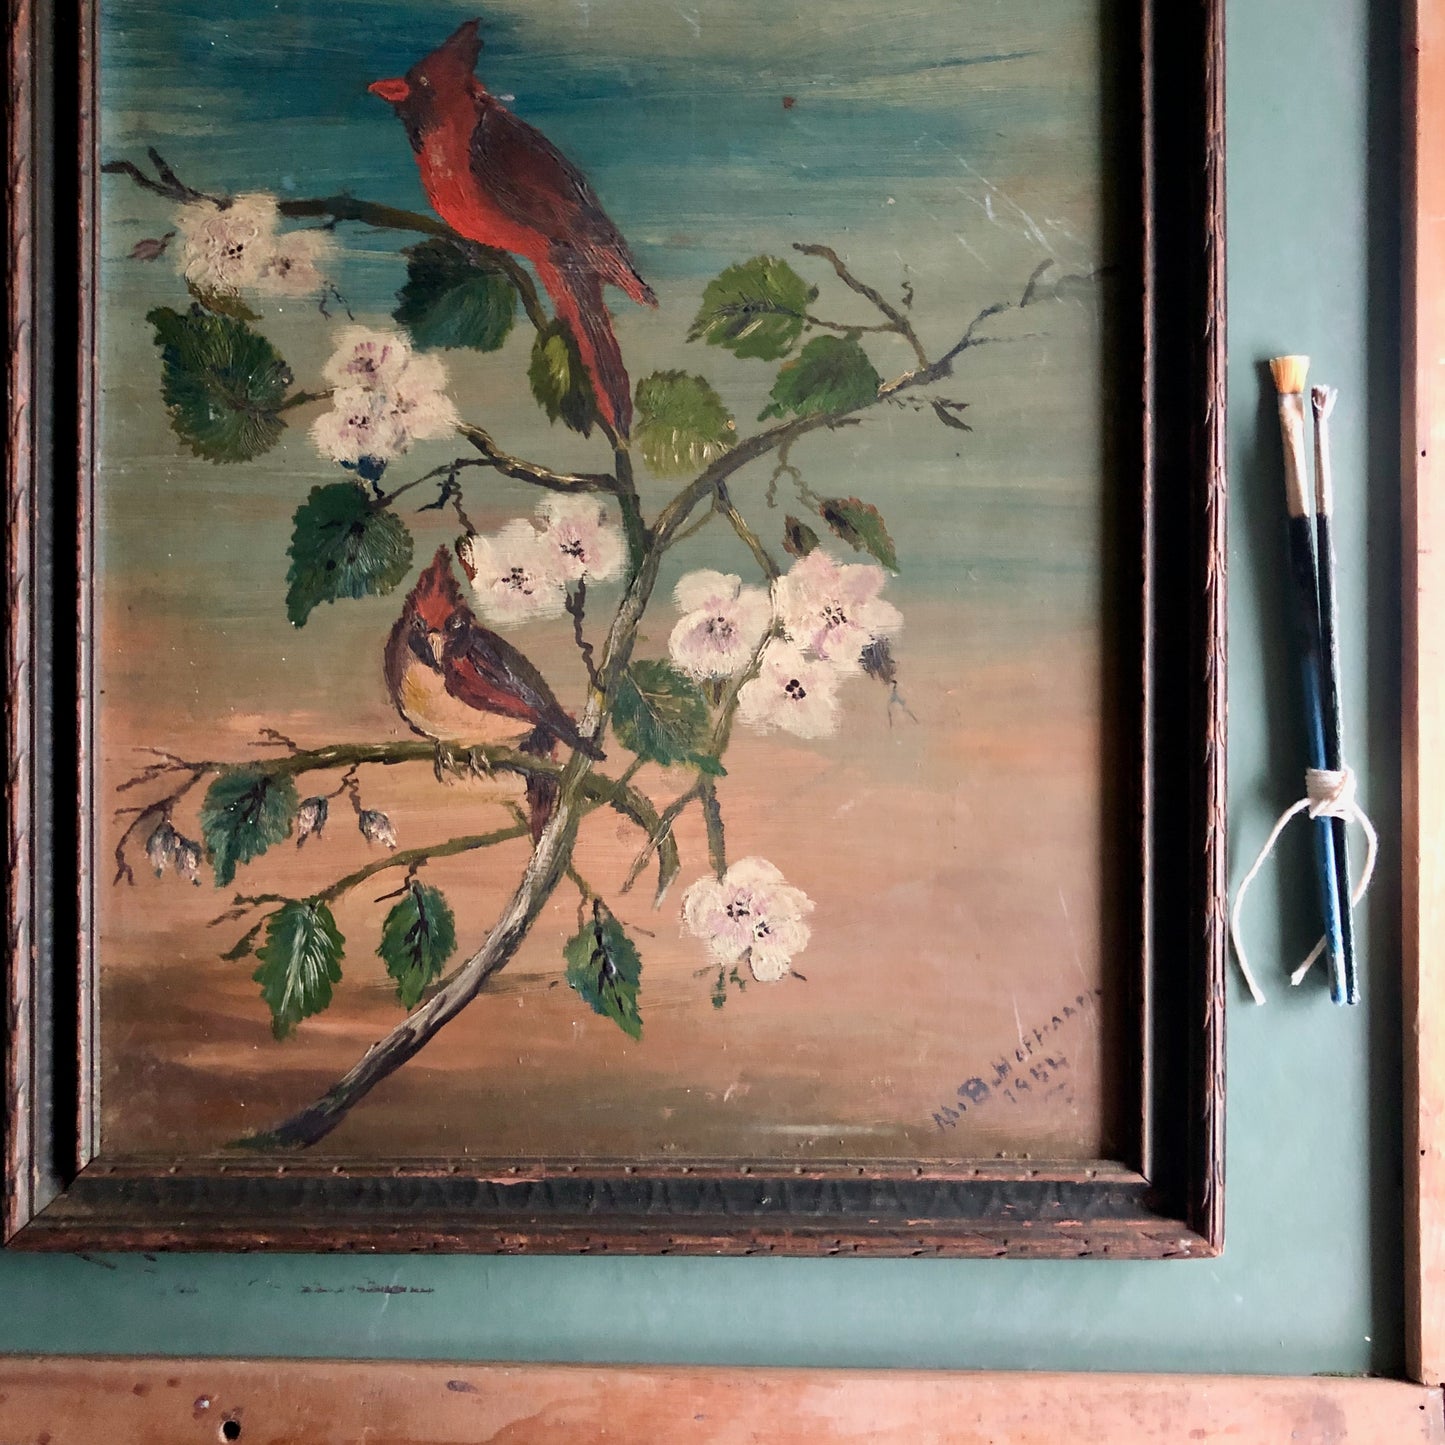 Primitive Oil Painting of Cardinals on Tree Branch (c.1954)